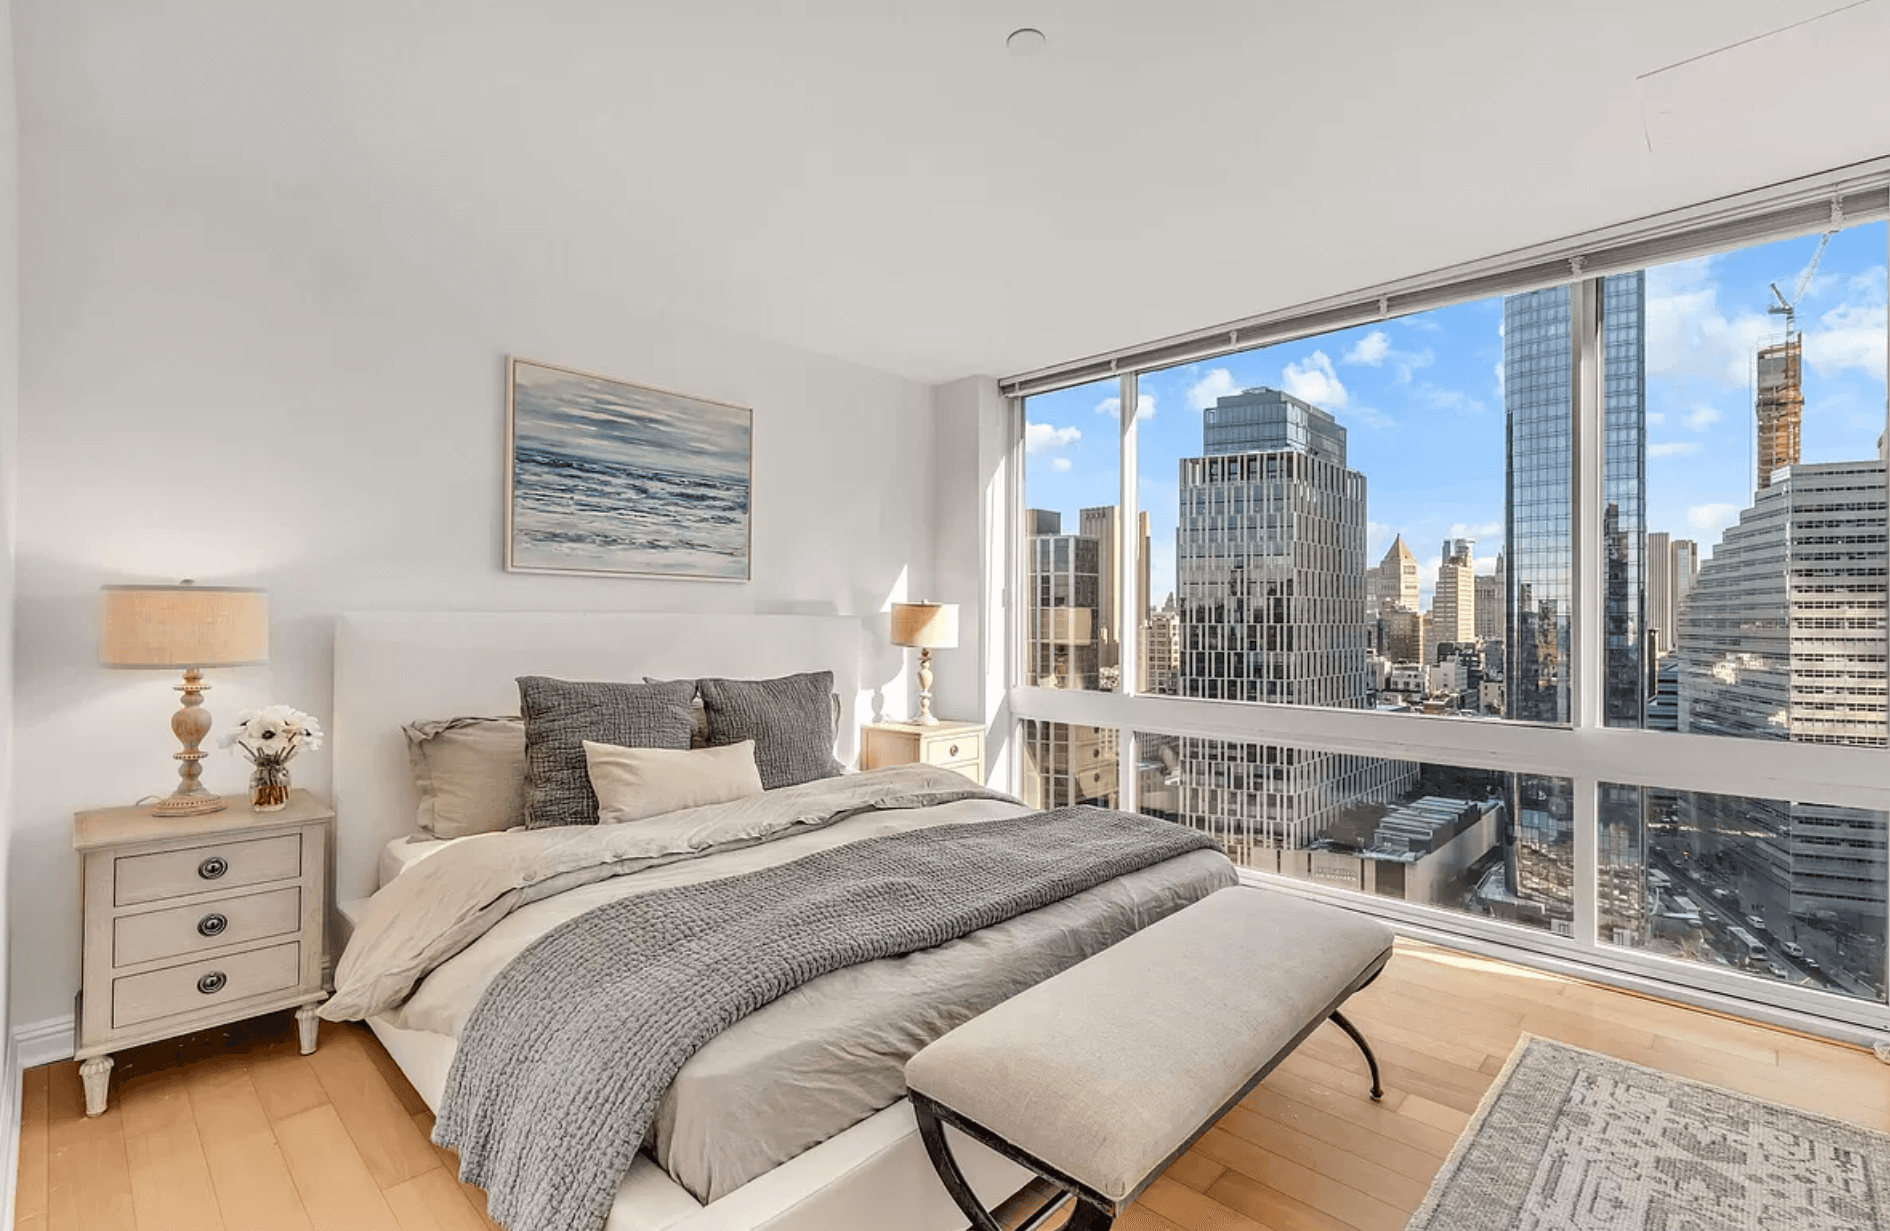 MAGNIFICENT 3 BED / 2 BATH IN TRIBECA WITH A STUNNING VIEW OF THE CITY